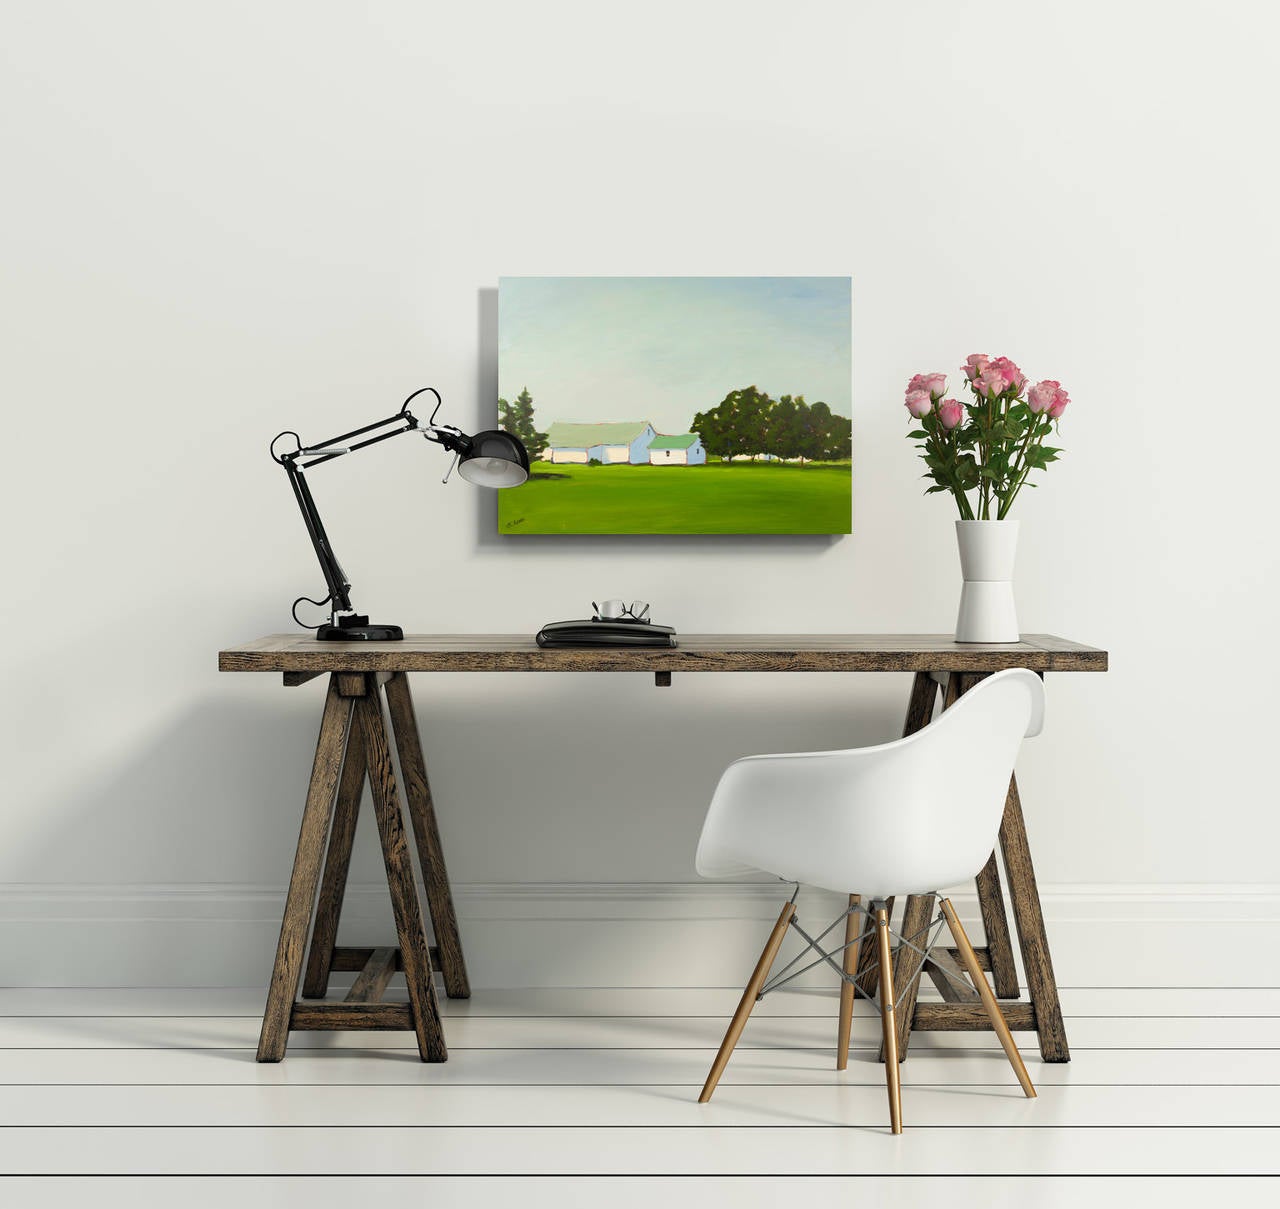 A getaway - tucked amist, green fields, blue skies, and open air. An elegant barn, housing memories for evermore. 

Carol C. Young is landscape painter working in acrylics and oils. She is a plein air painter as well as a studio artist whose work